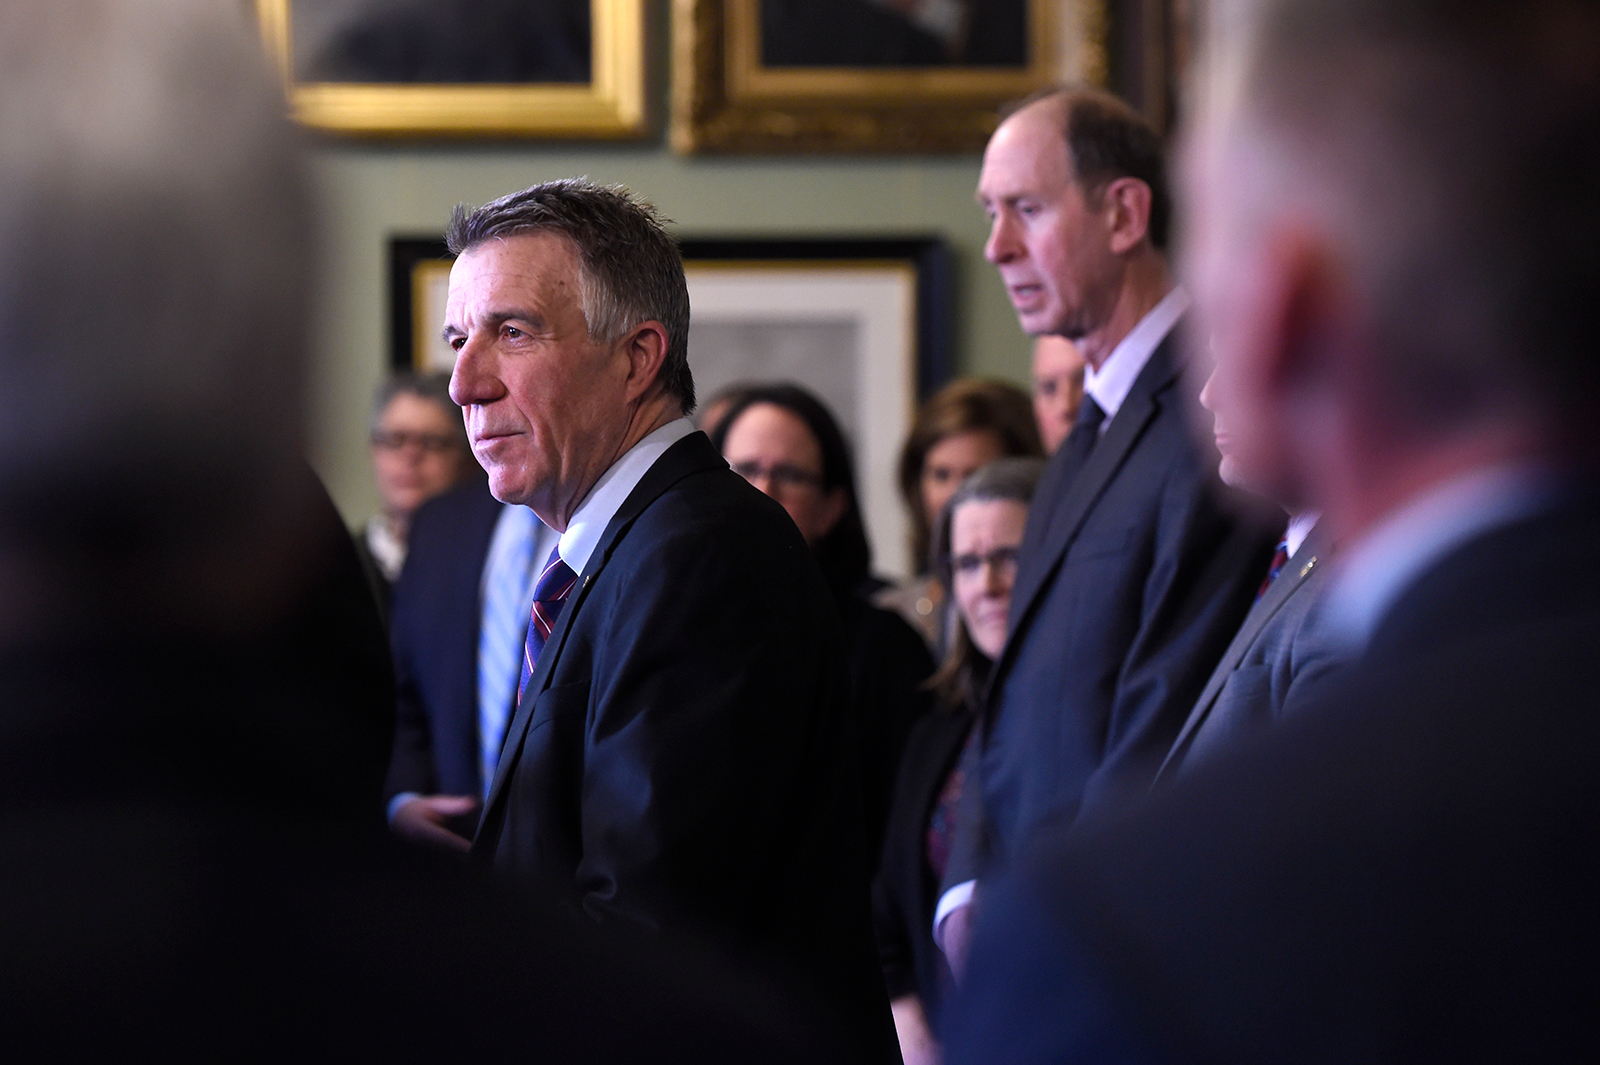 Vermont Gov. Phil Scott speaks during a press conference in Montpelier, Vermont, on March 13.